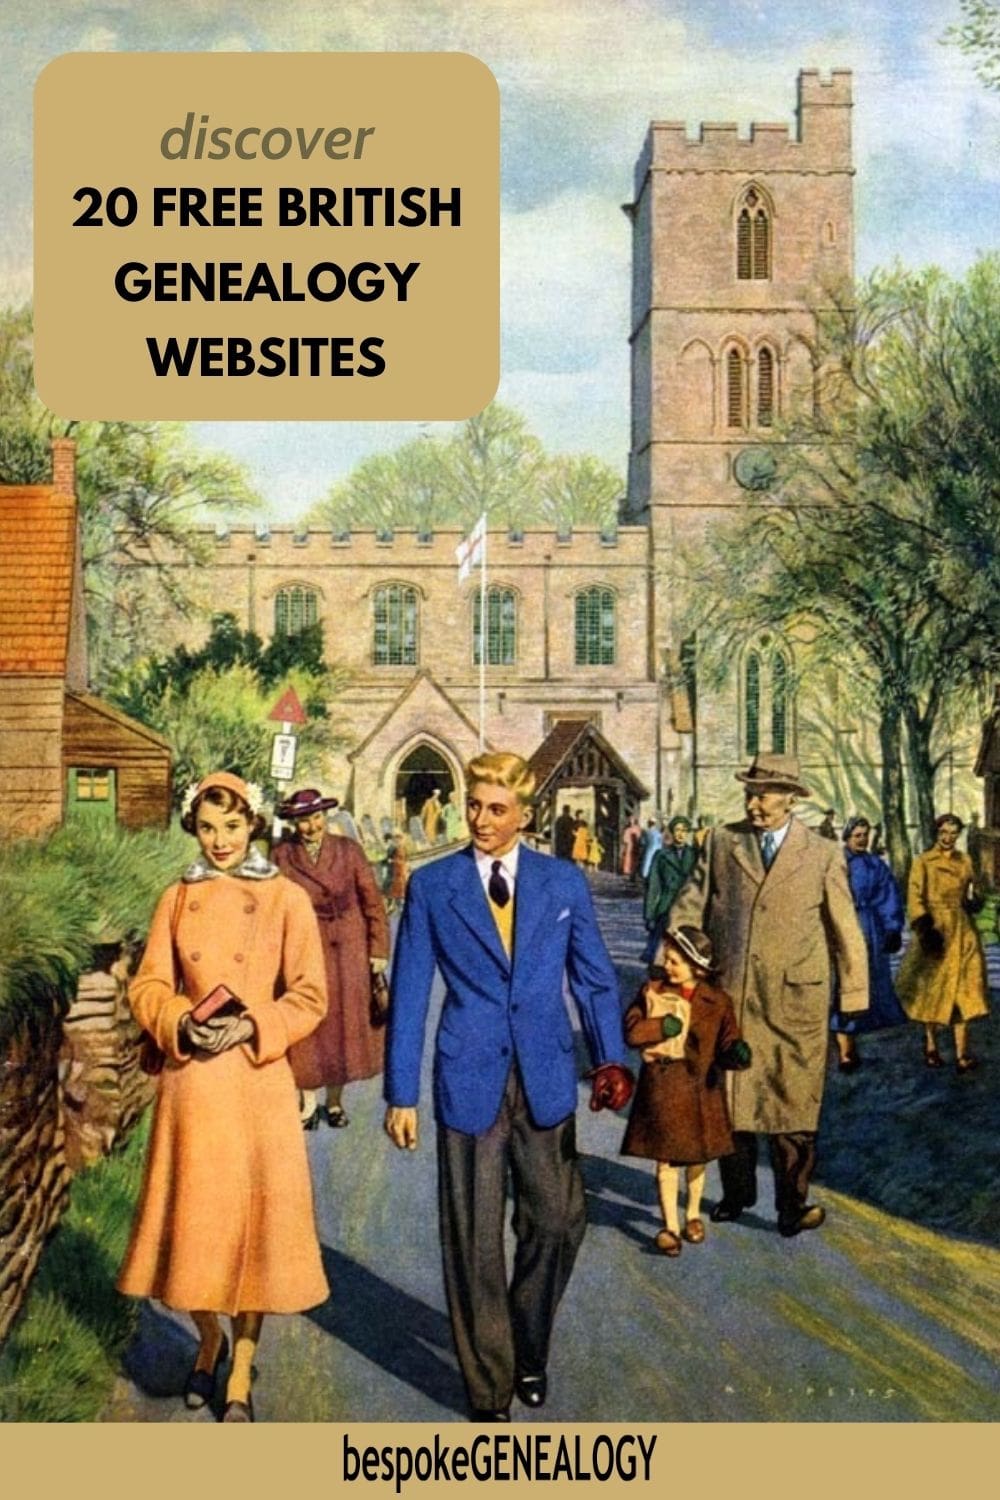 Discover 20 free British genealogy websites. Illustration from the 1950s of people leaving a British church after a service.